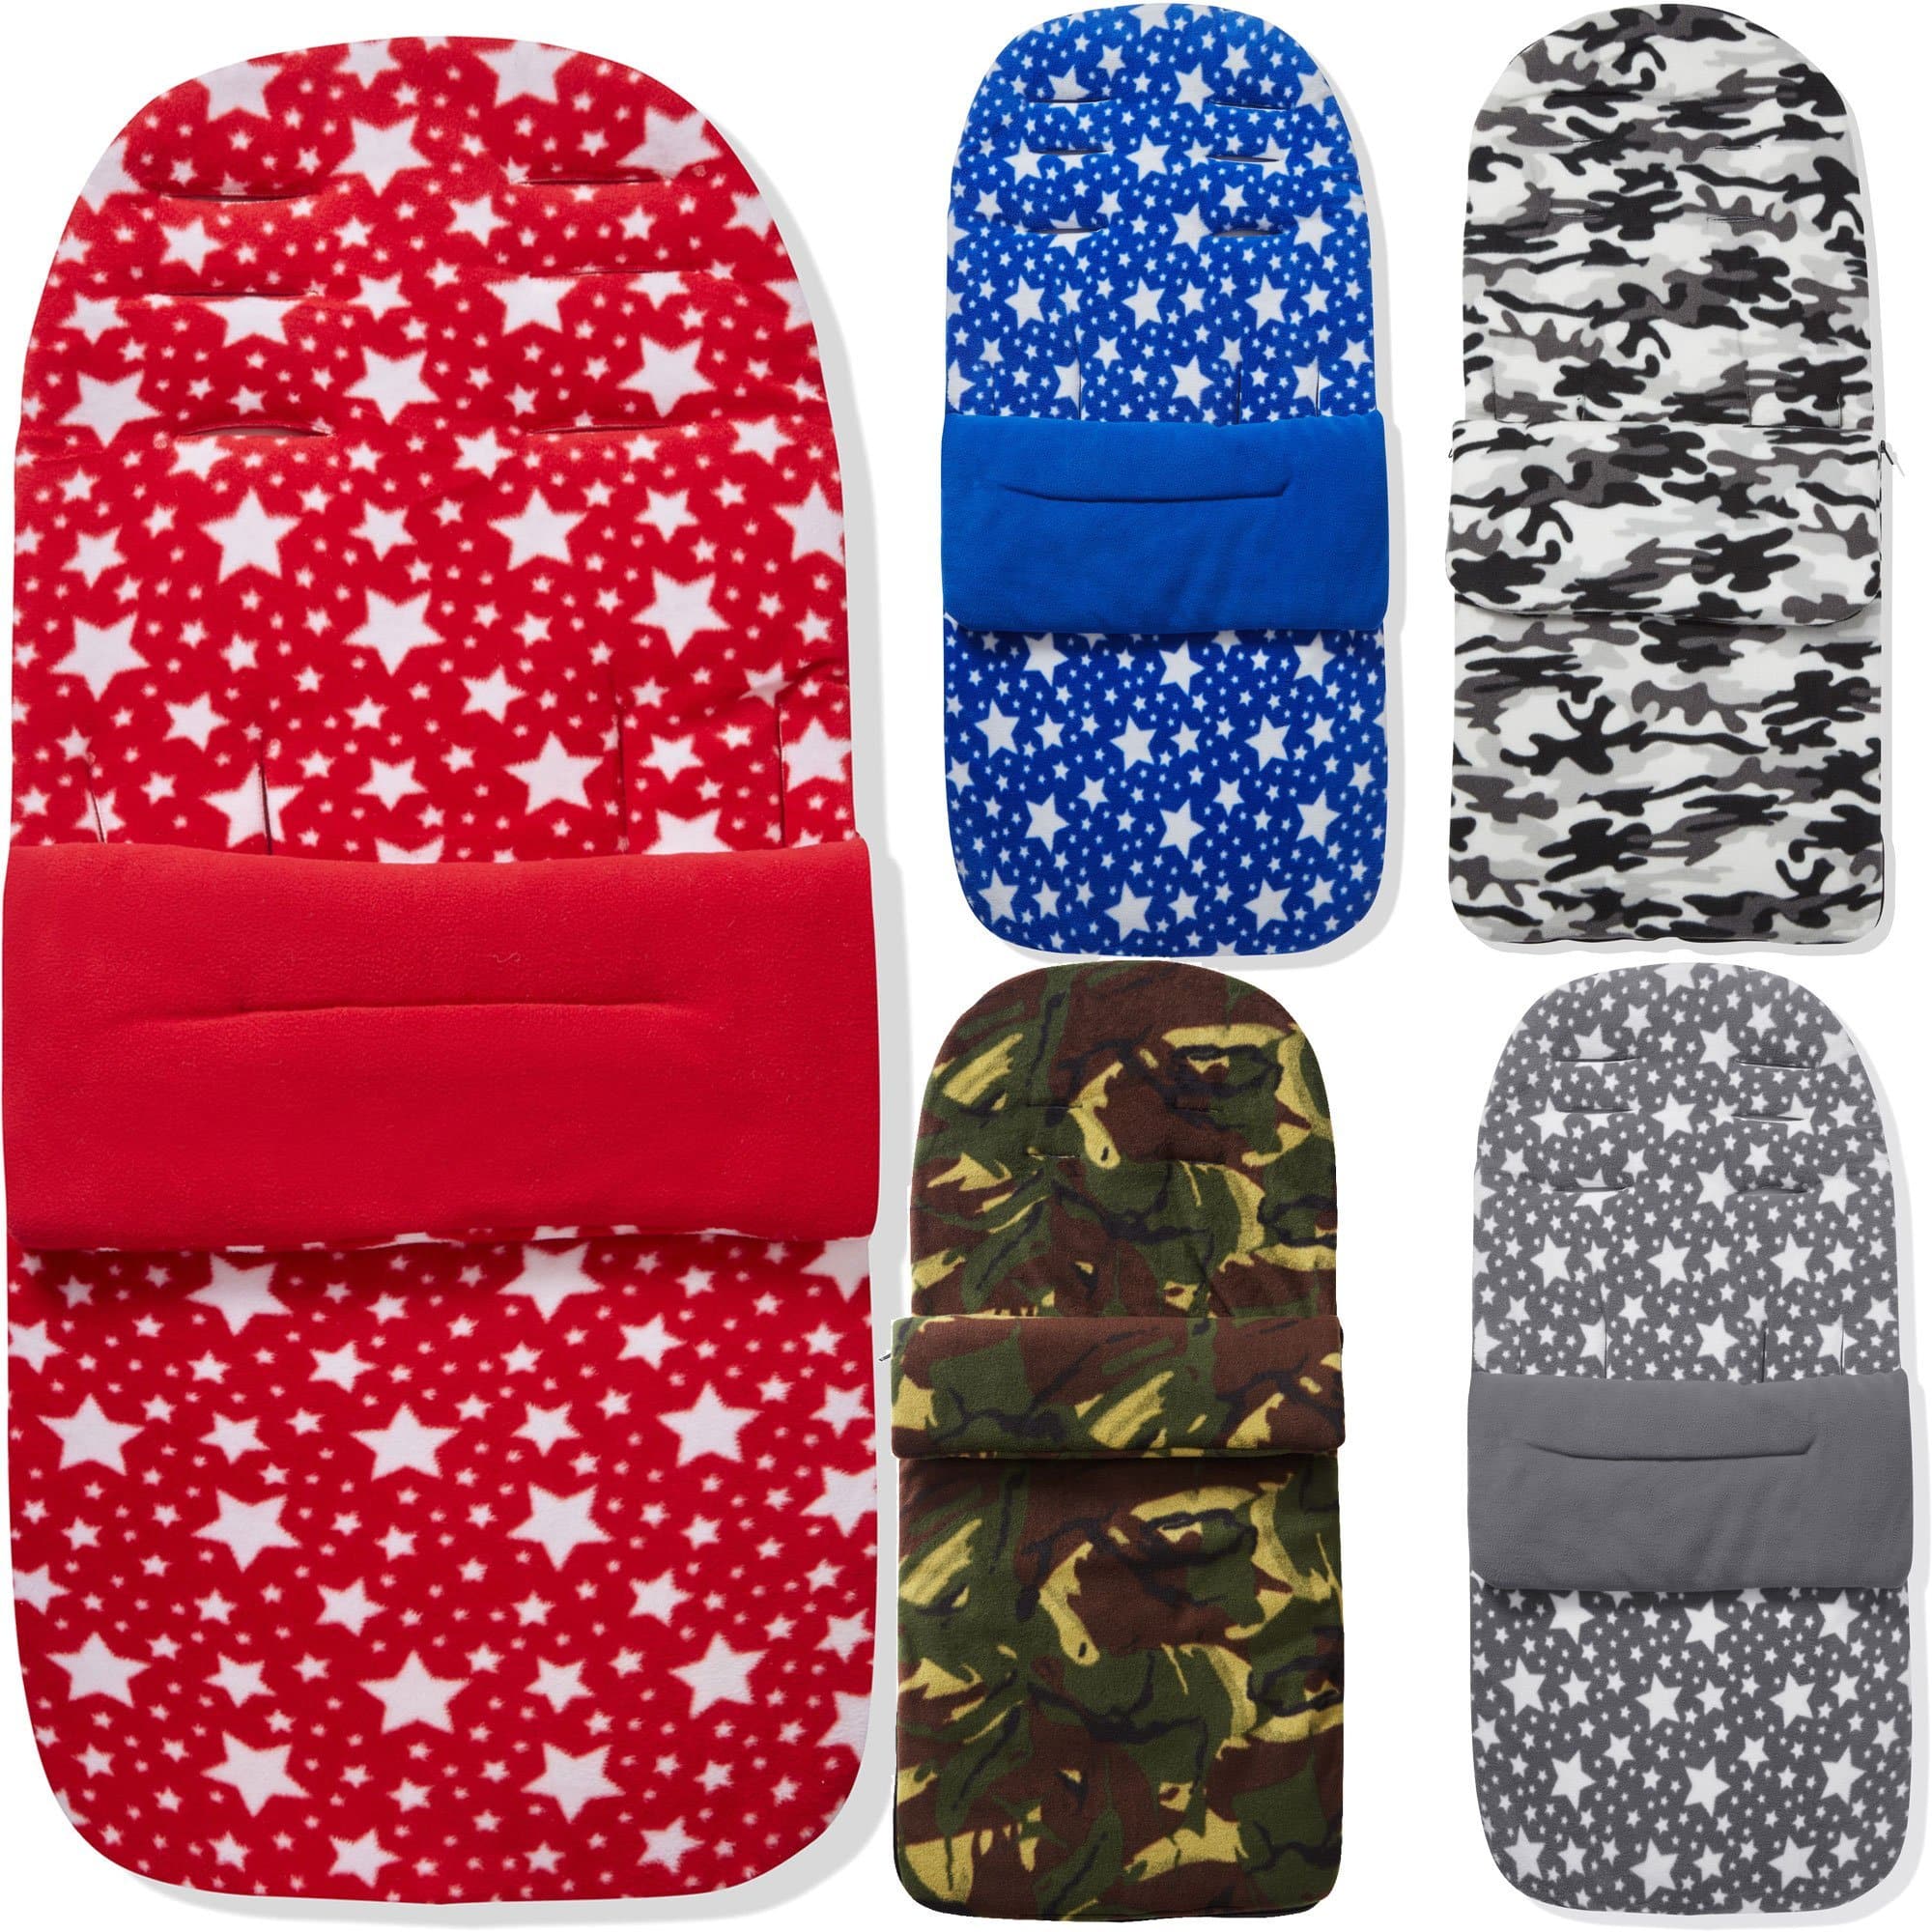 Fleece Footmuff / Cosy Toes Compatible with Babyzen - For Your Little One